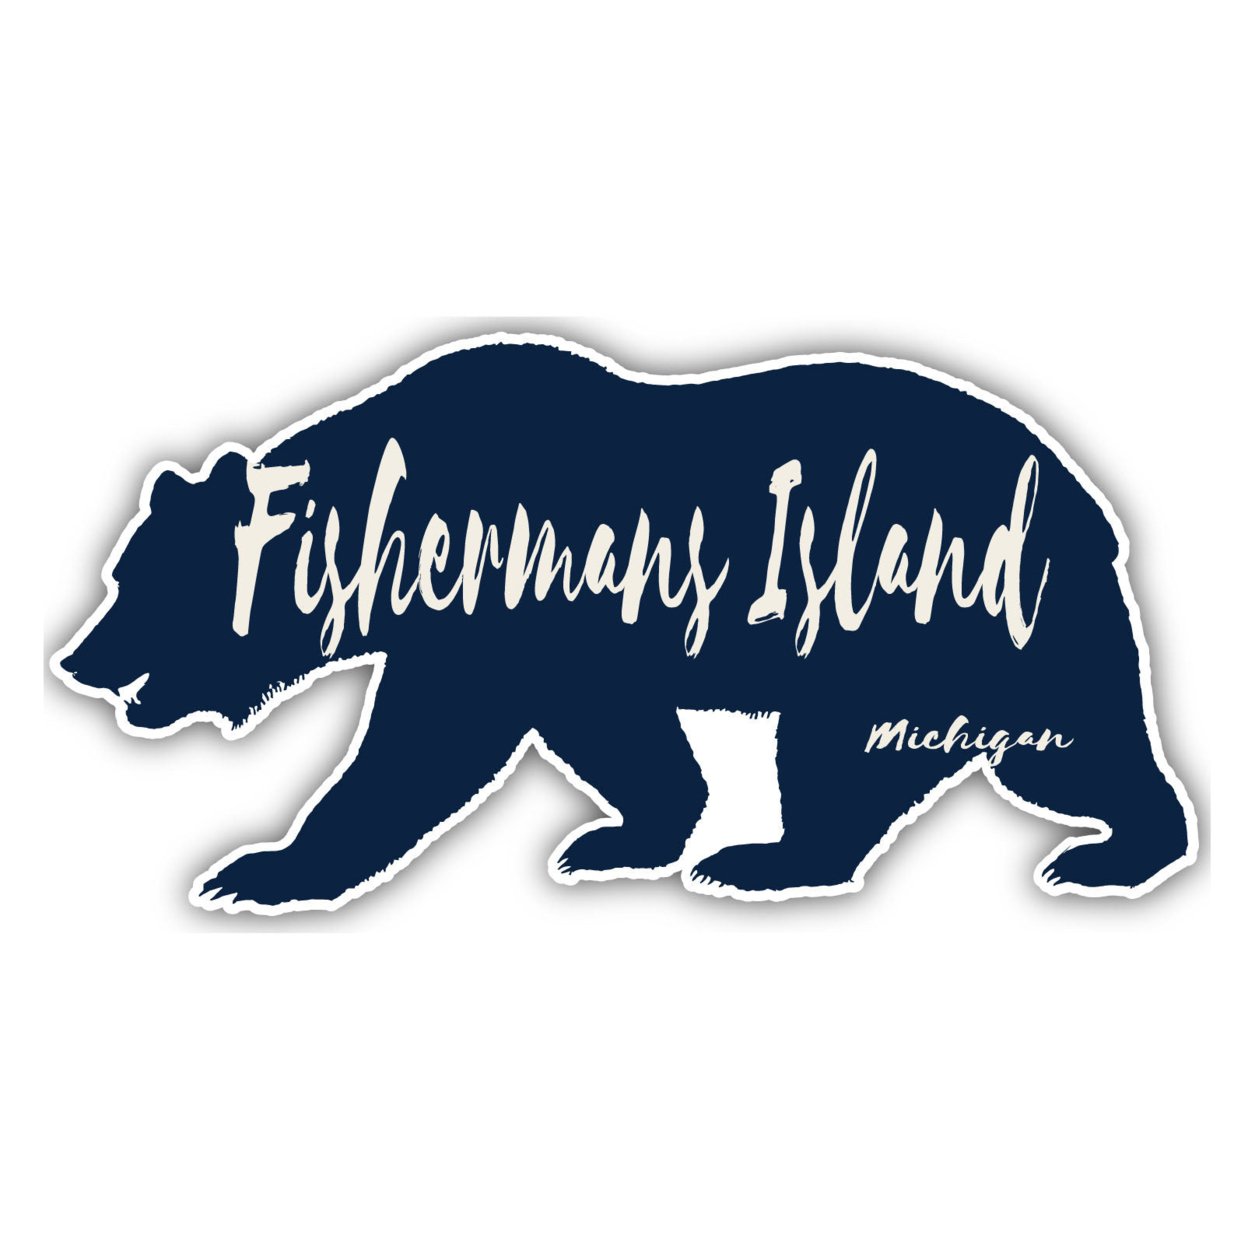 Fishermans Island Michigan Souvenir Decorative Stickers (Choose Theme And Size) - 4-Pack, 2-Inch, Bear